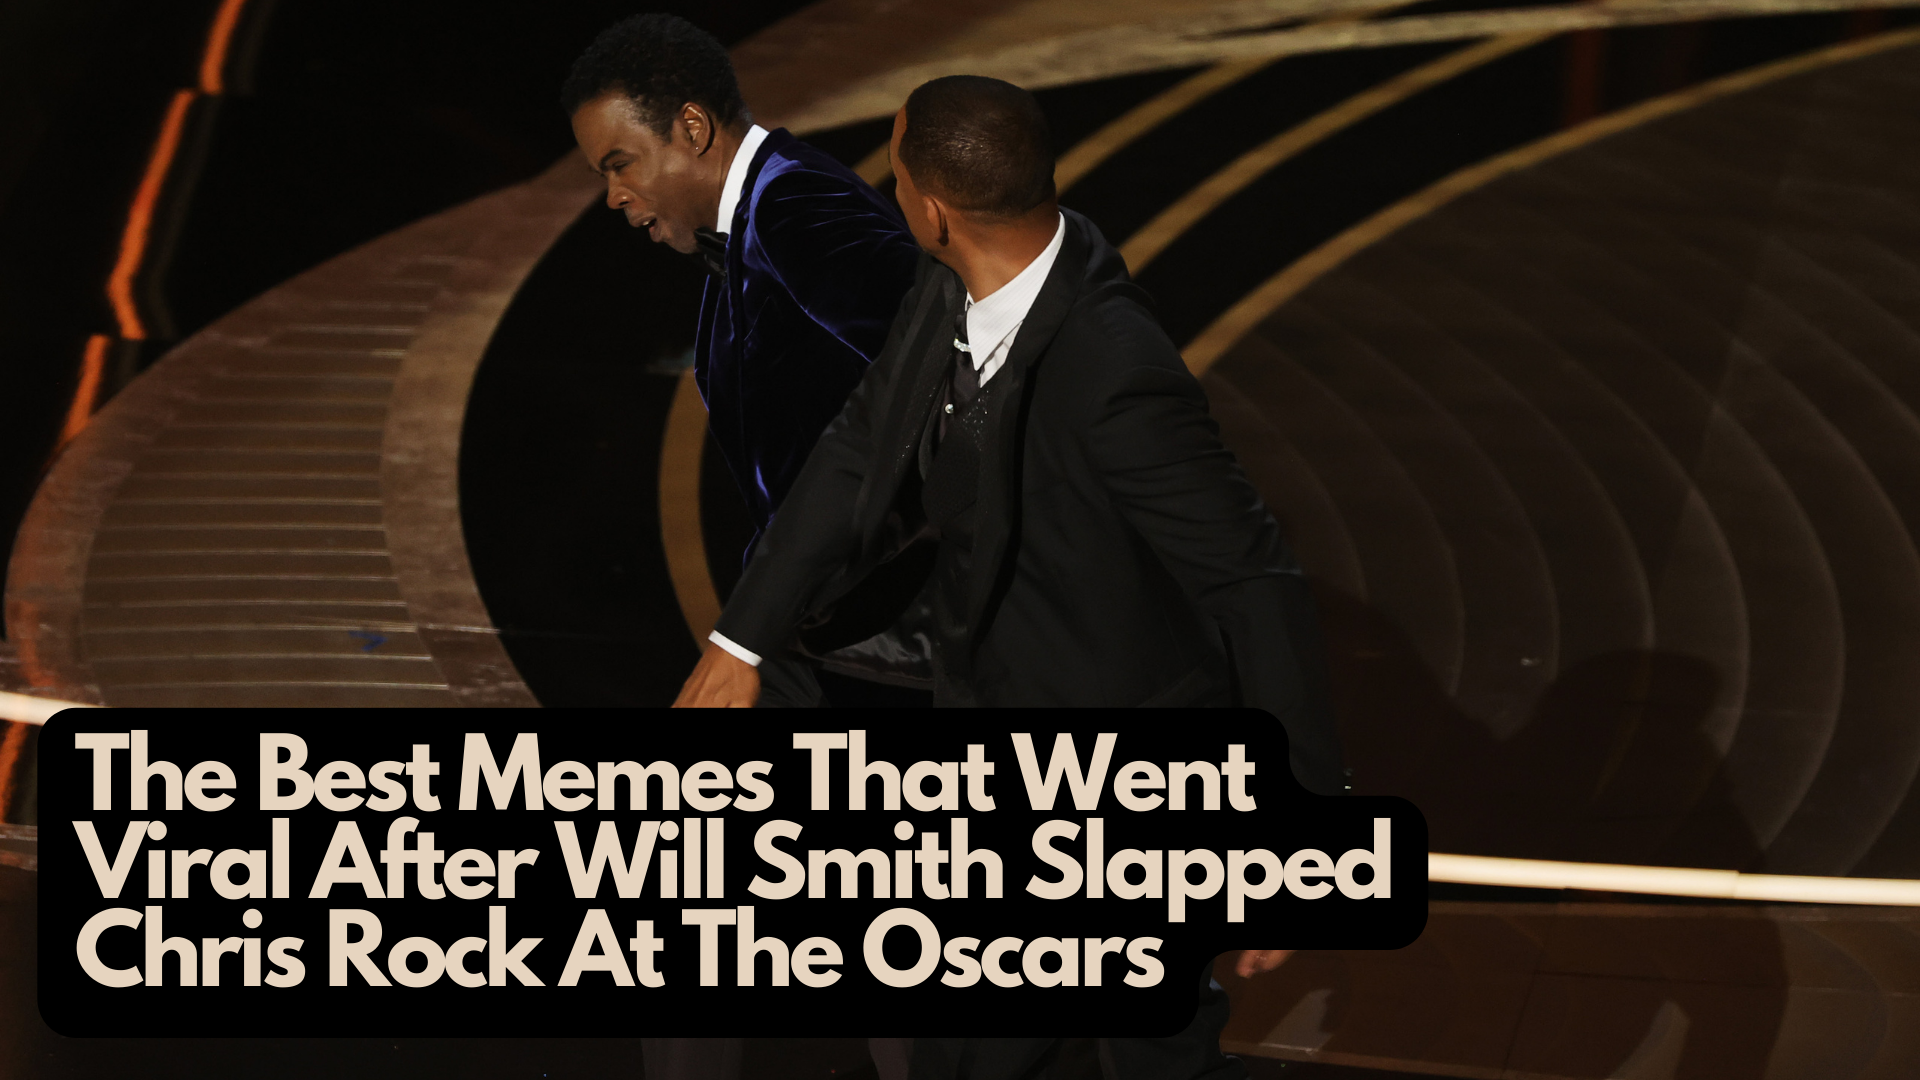 The Best Memes That Went Viral After Will Smith Slapped Chris Rock At The Oscars